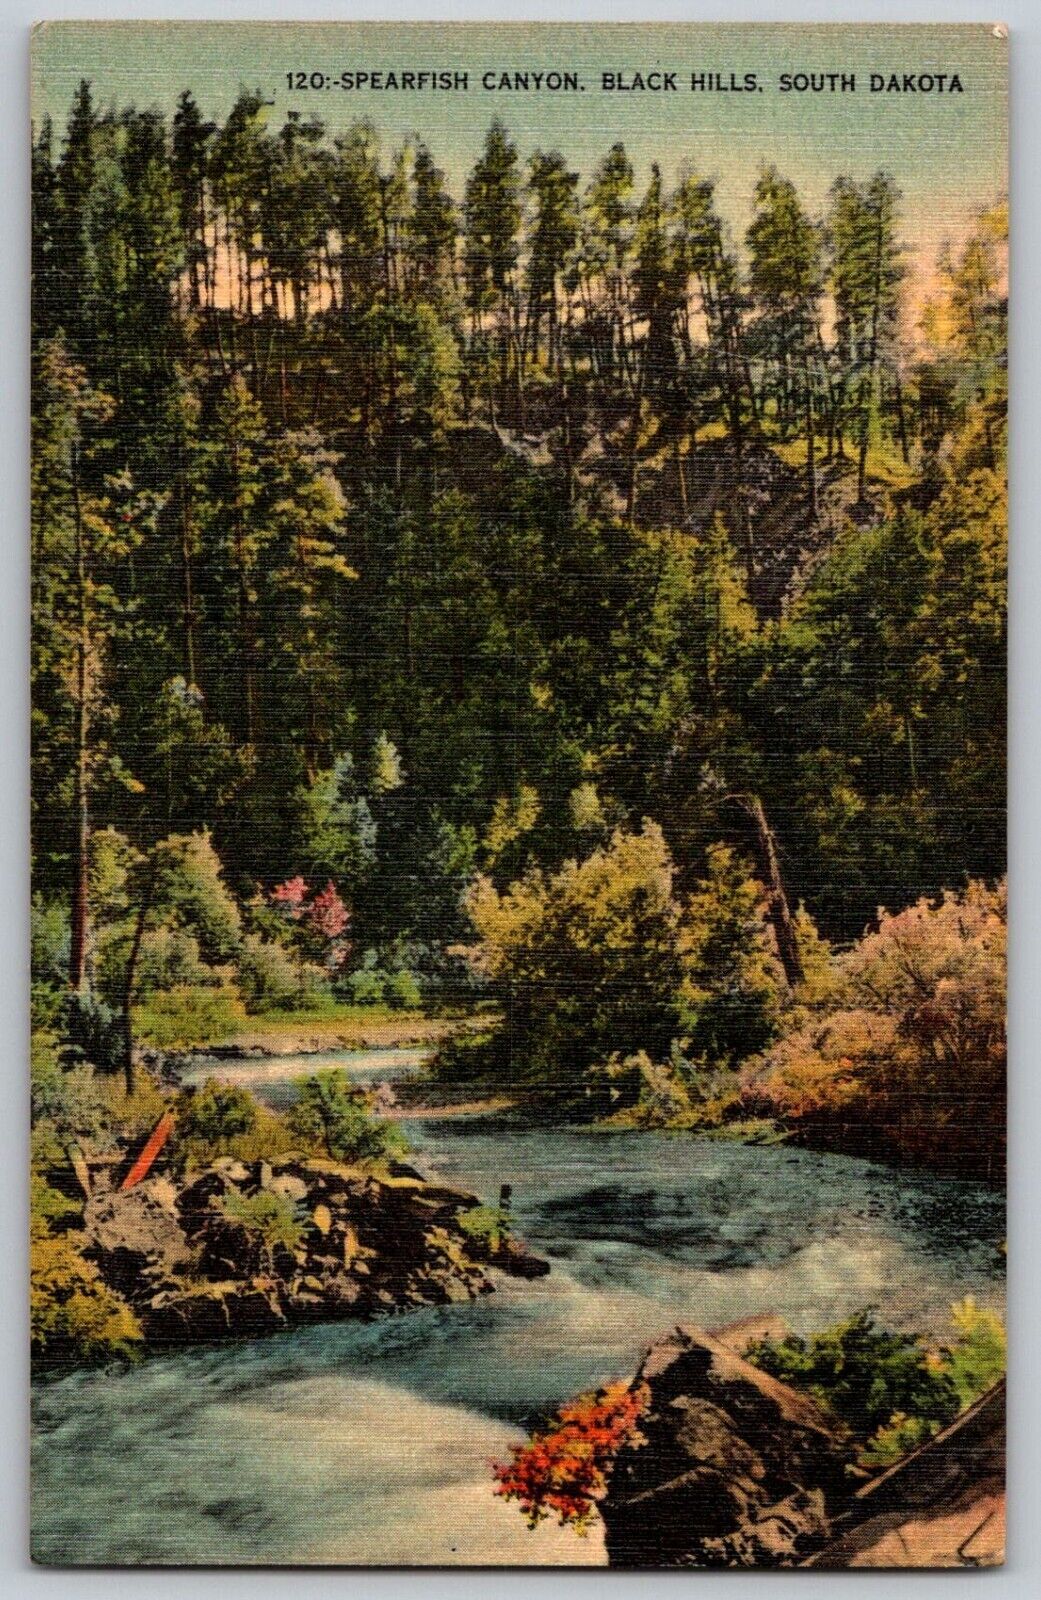 Vintage Linen Postcard - Spearfish Canyon Black Hills SD - Posted 1946